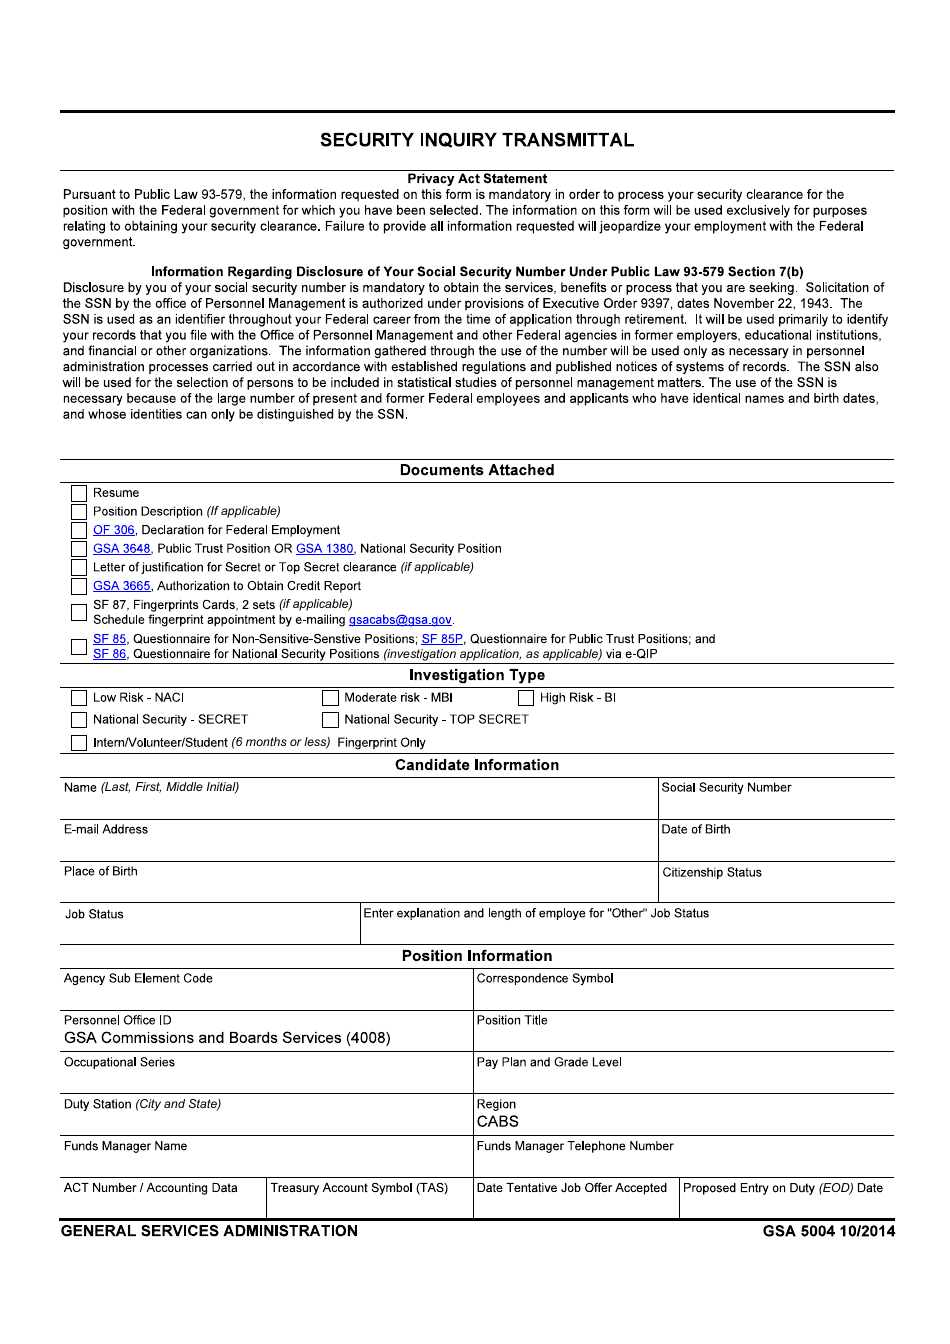 GSA Form 5004 Security Inquiry Transmittal, Page 1